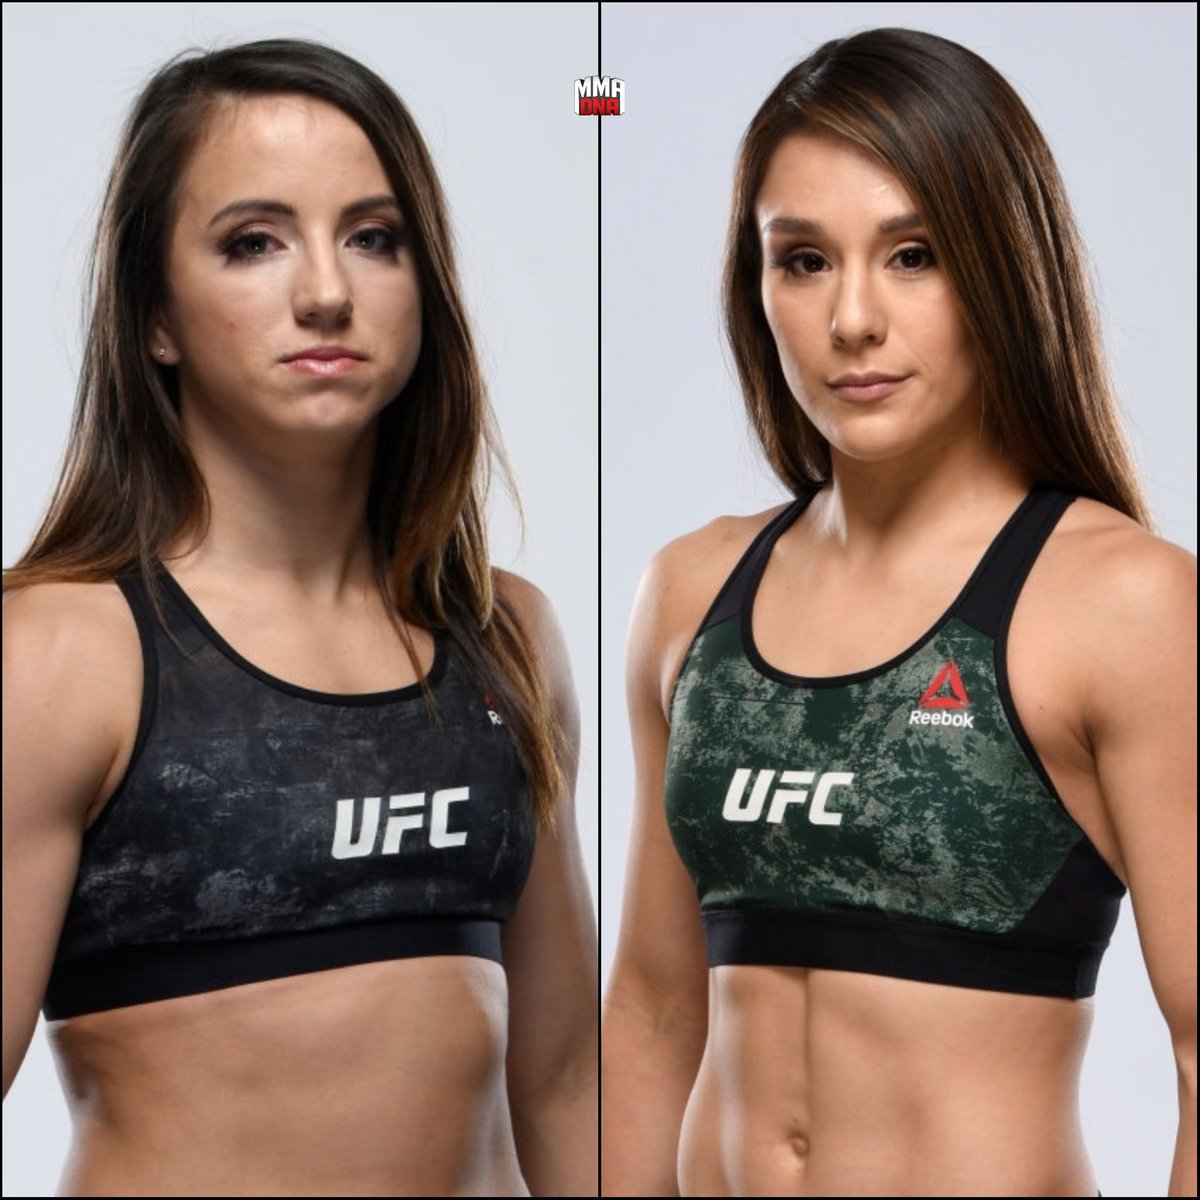 Maycee Barber will fight Alexa Grasso at UFC event on February 13th. (per. 